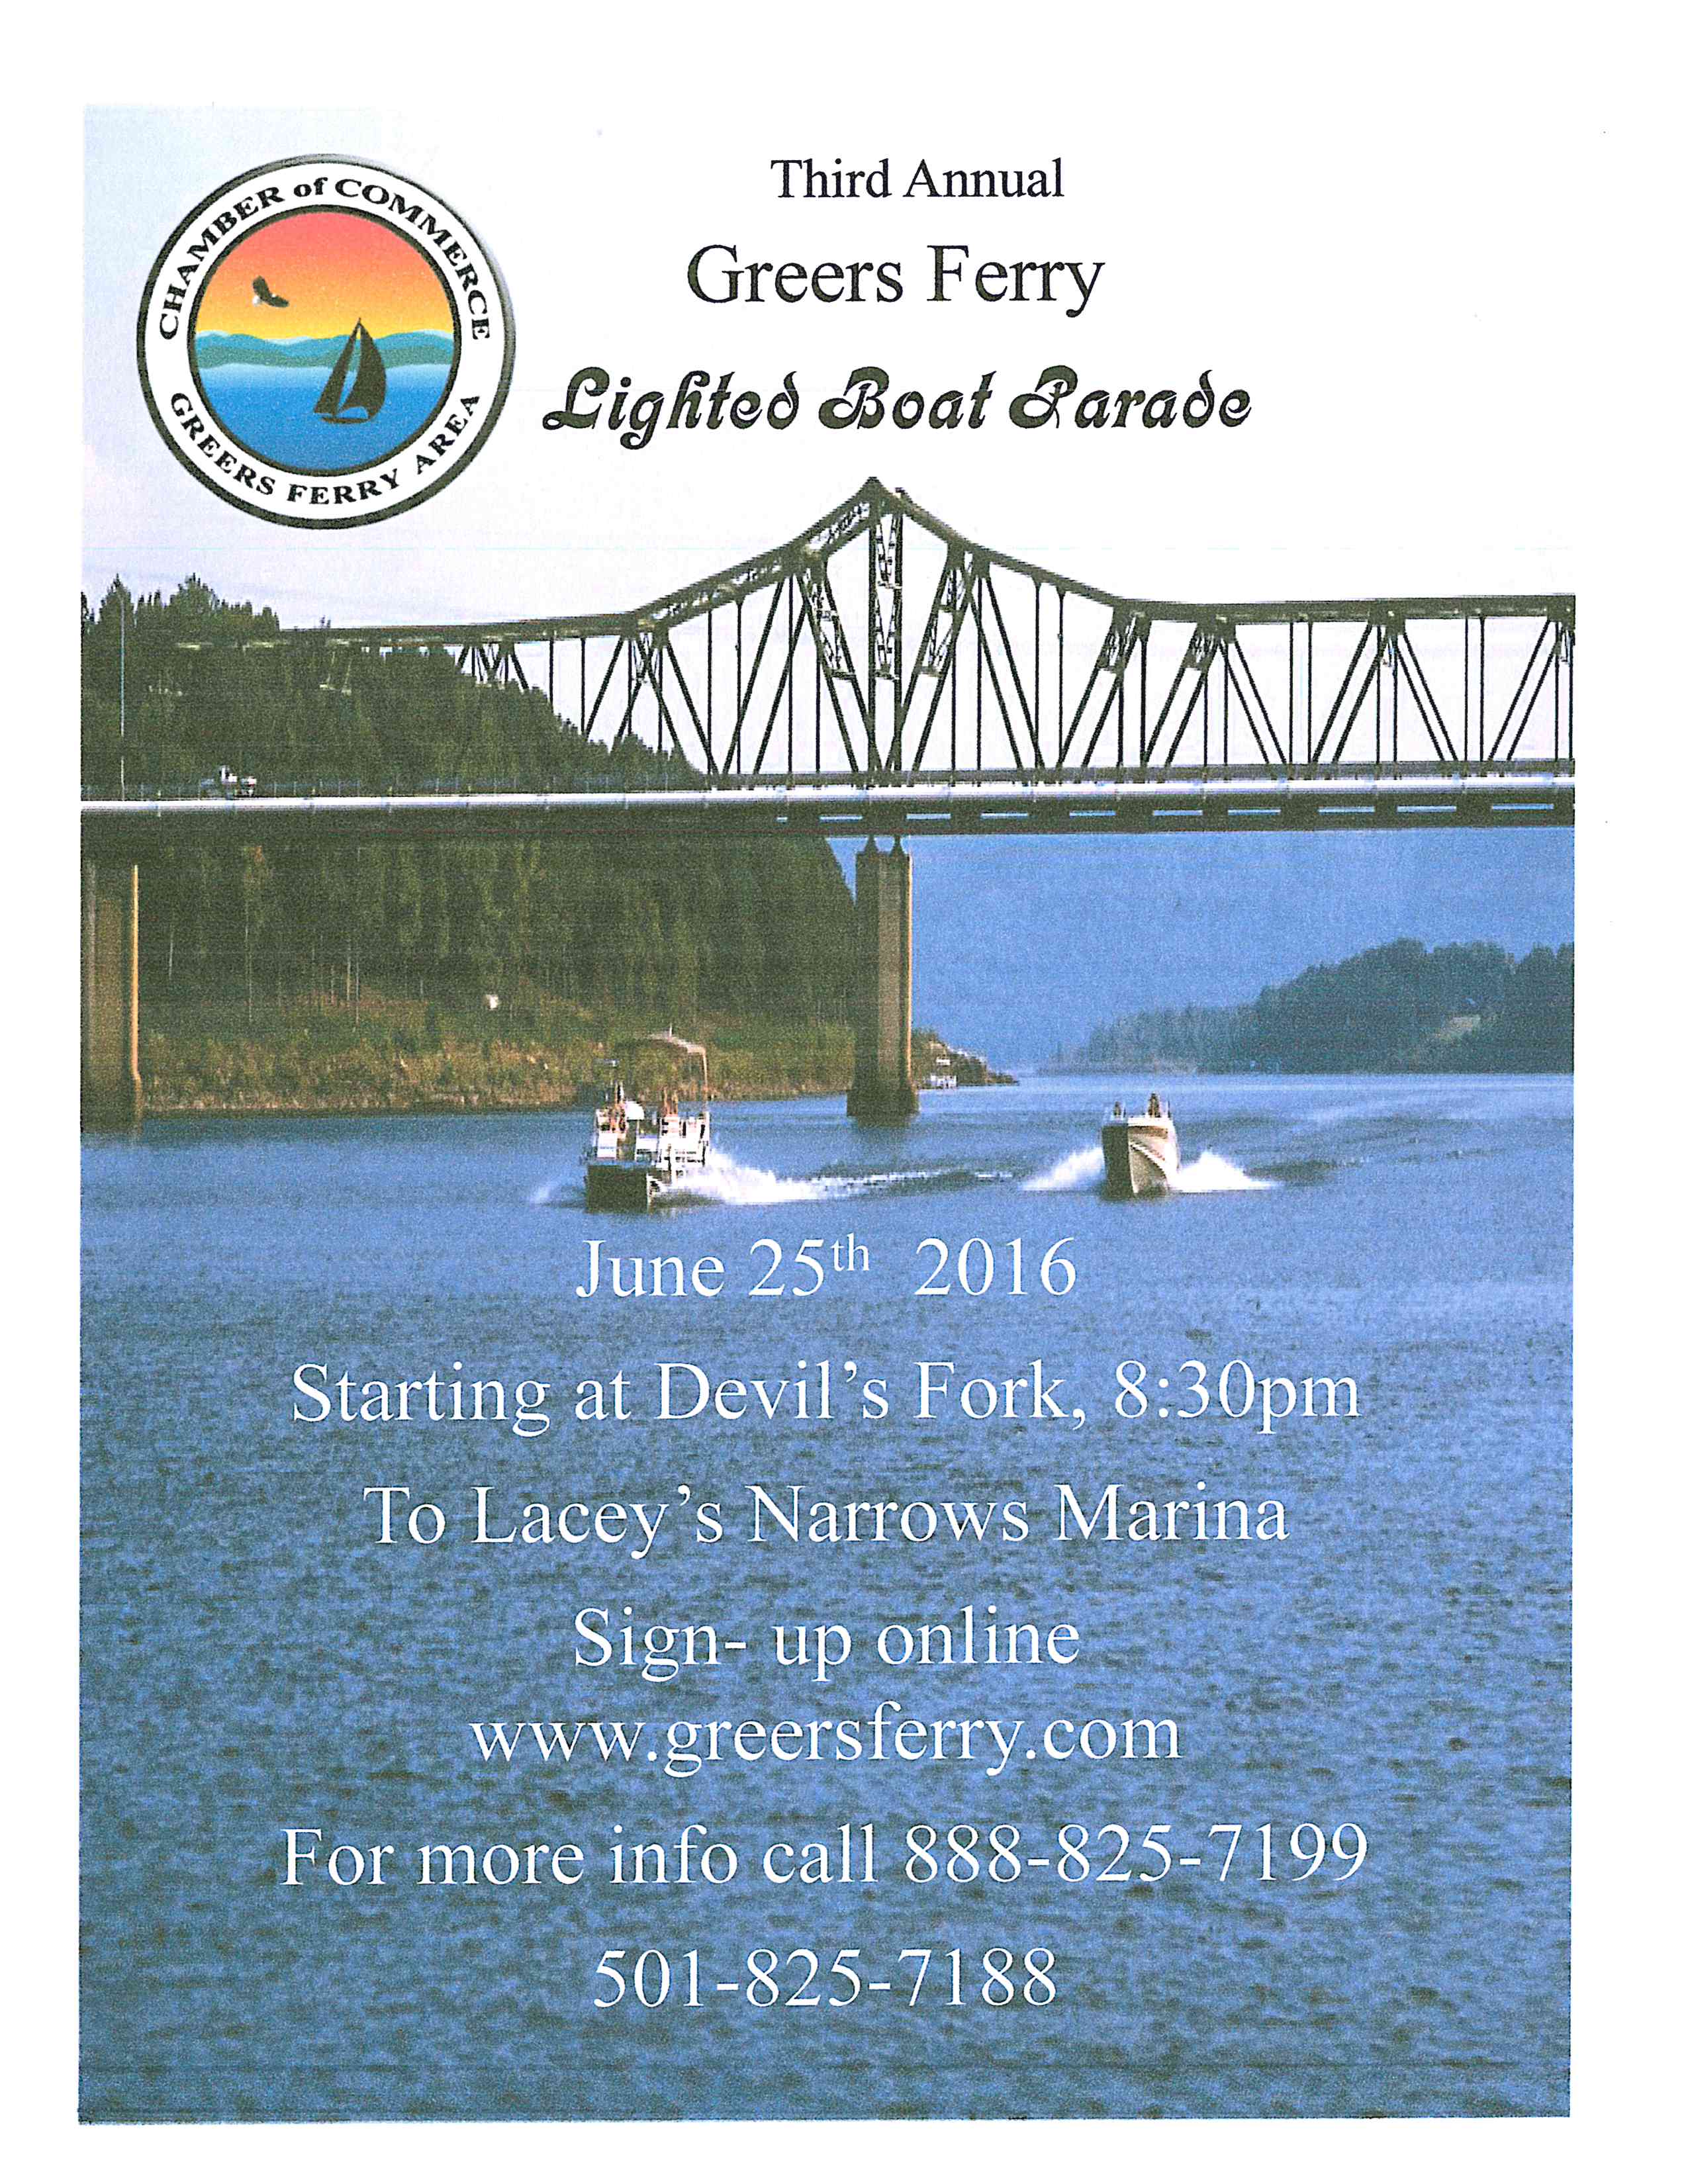 Greers Ferry Lighted Boat Parade